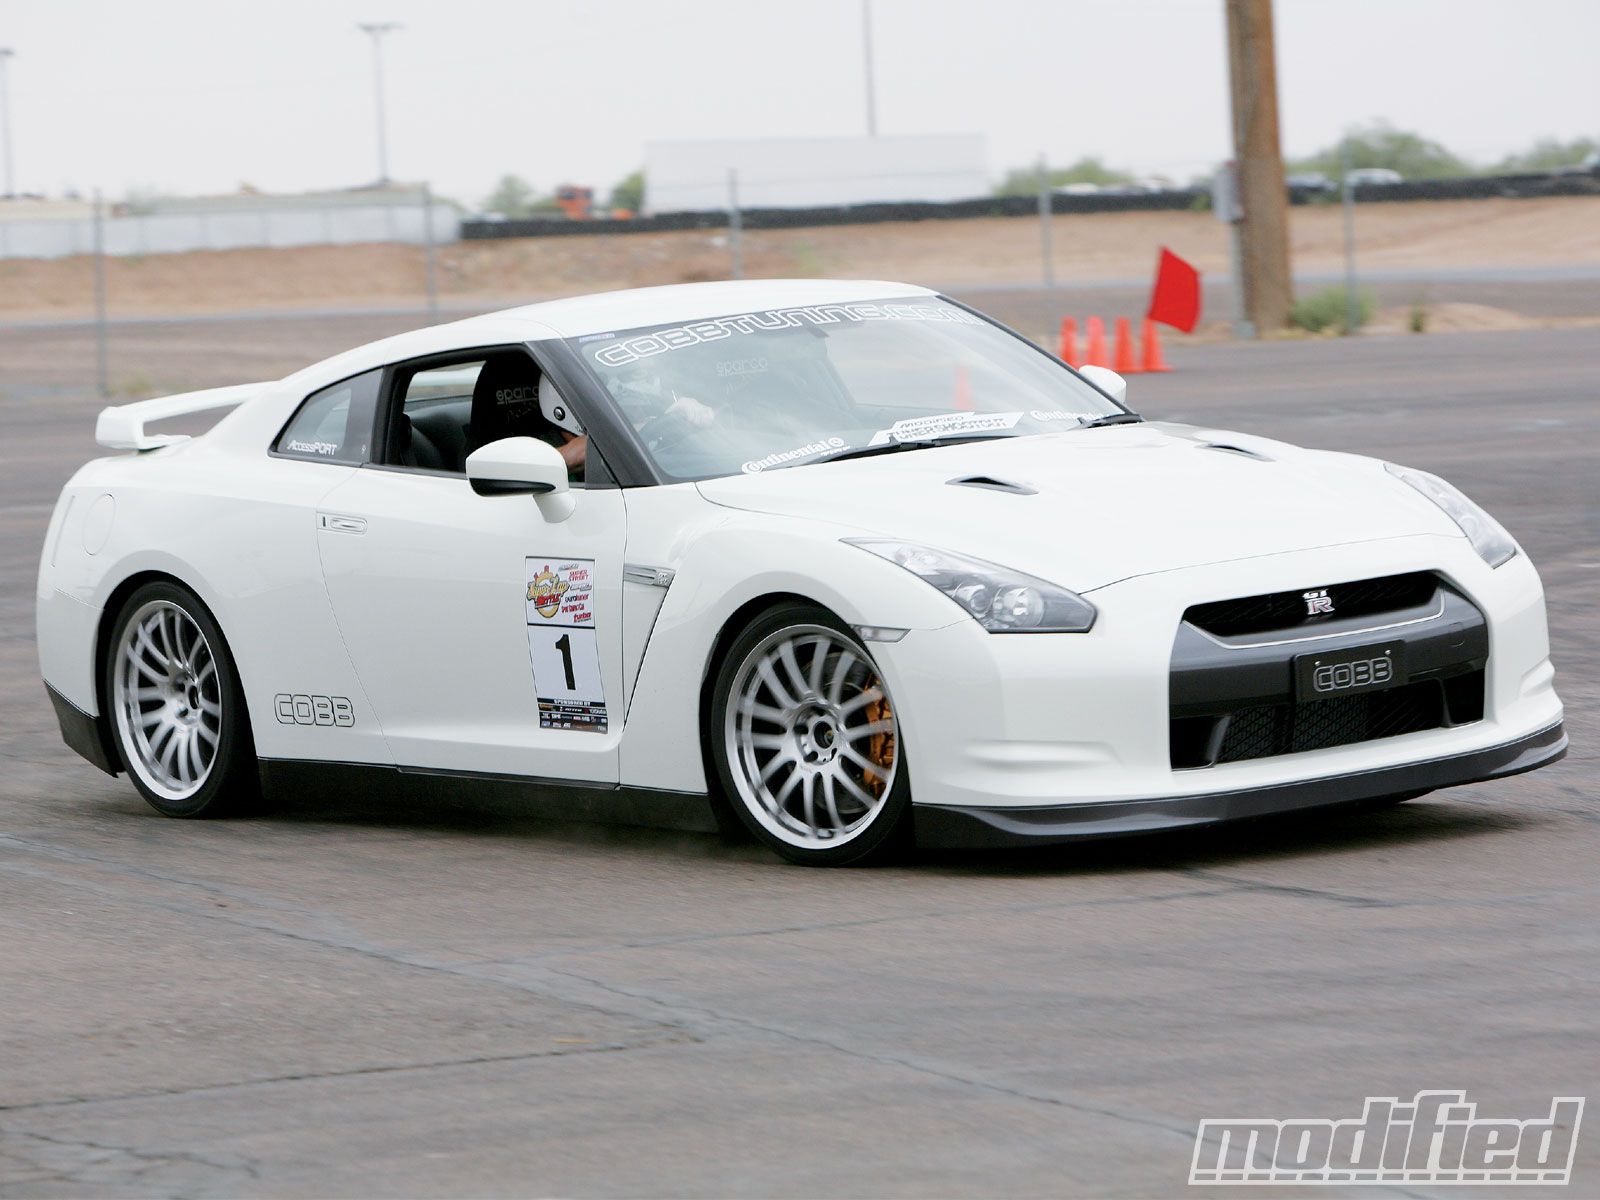 Nissan GT-R, Acura NSX, Mazda RX-7 - 10 Best Track Cars - Modified ...